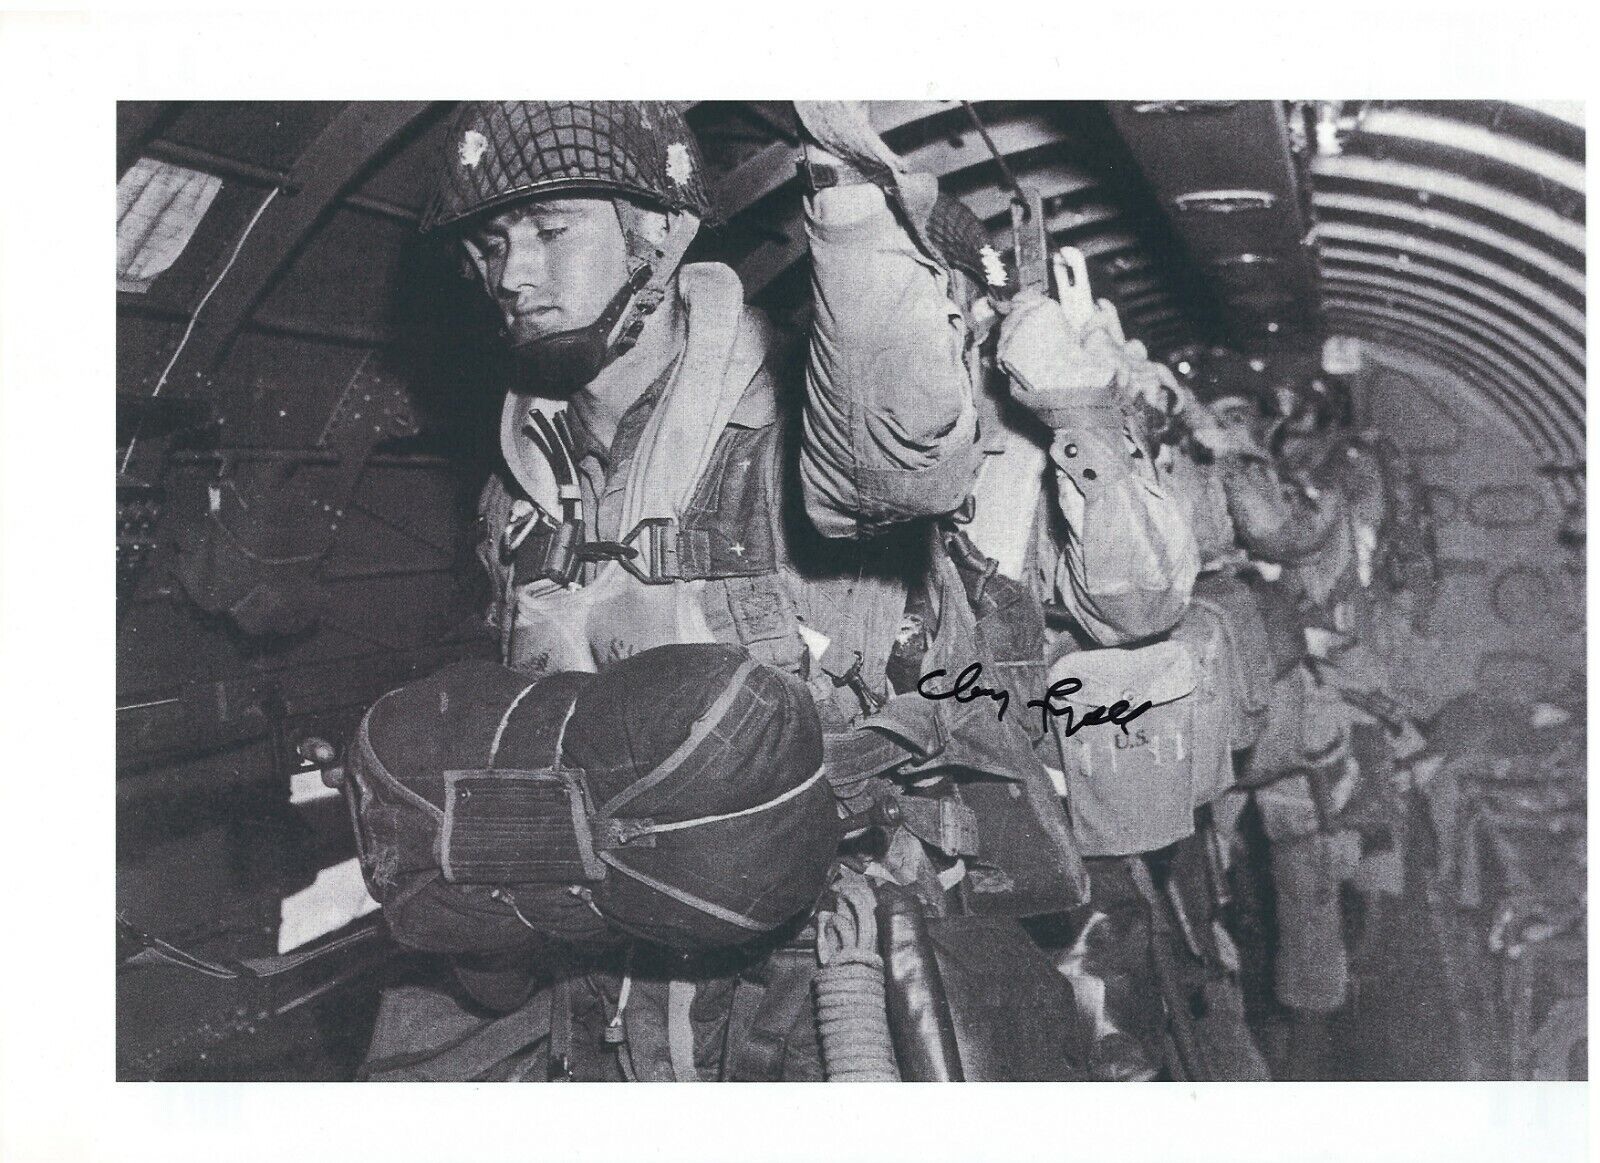 CLANCY LYALL 101ST AIRBORNE 506 PIR, EASY CO, BAND OF BROTHERS RARE SIGNED Photo Poster painting